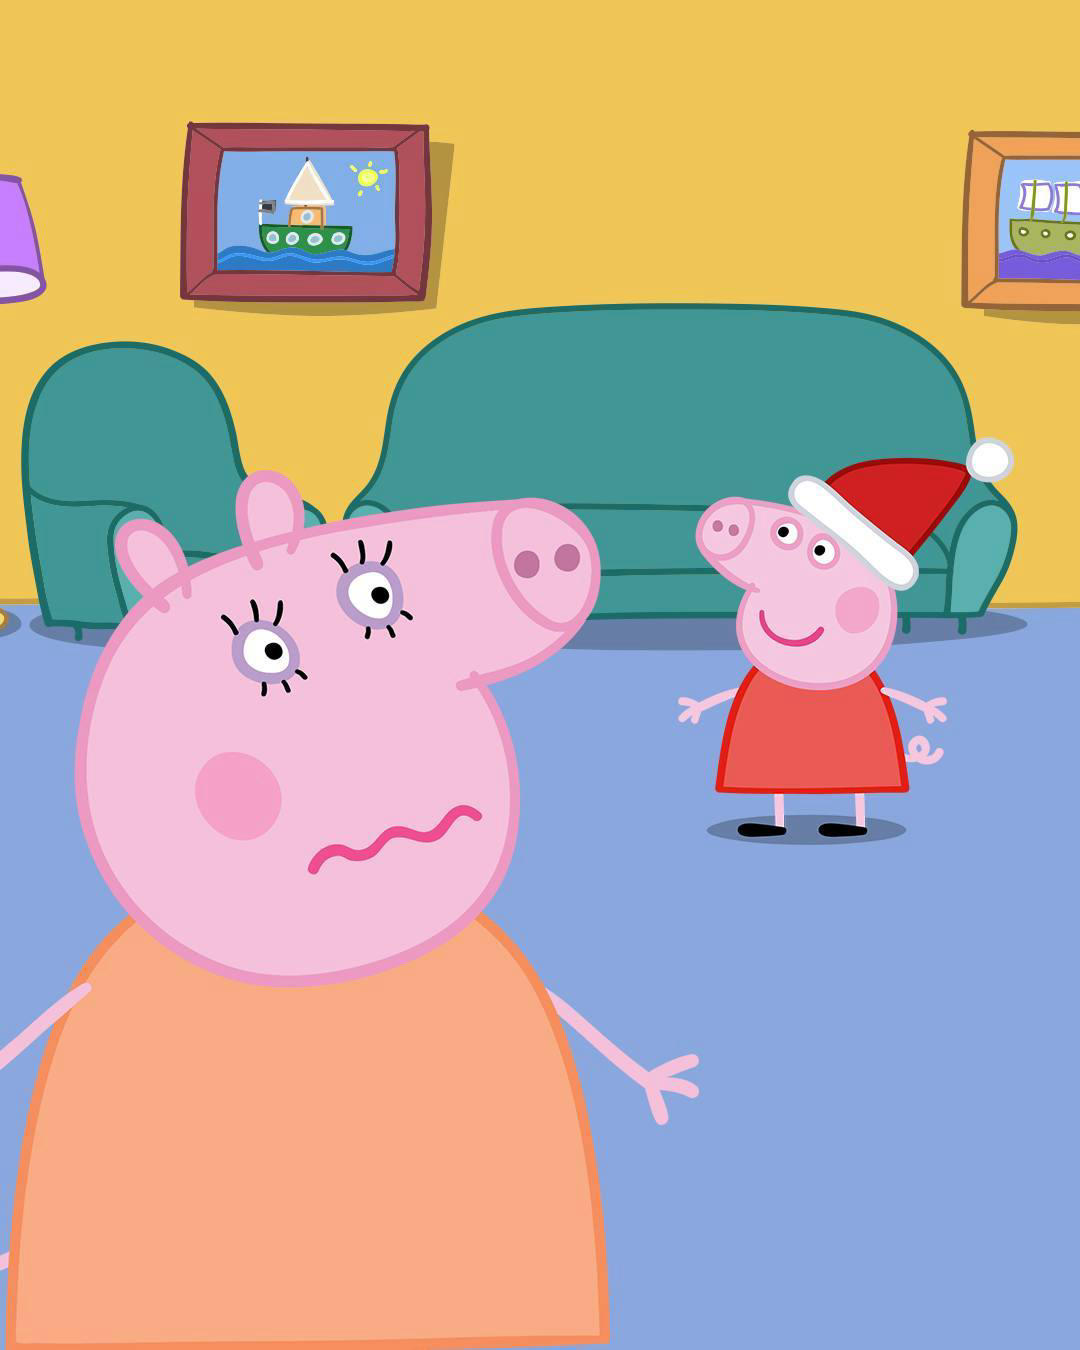 Peppa Pig - The moment you realize it will be Christmas in a little over a month